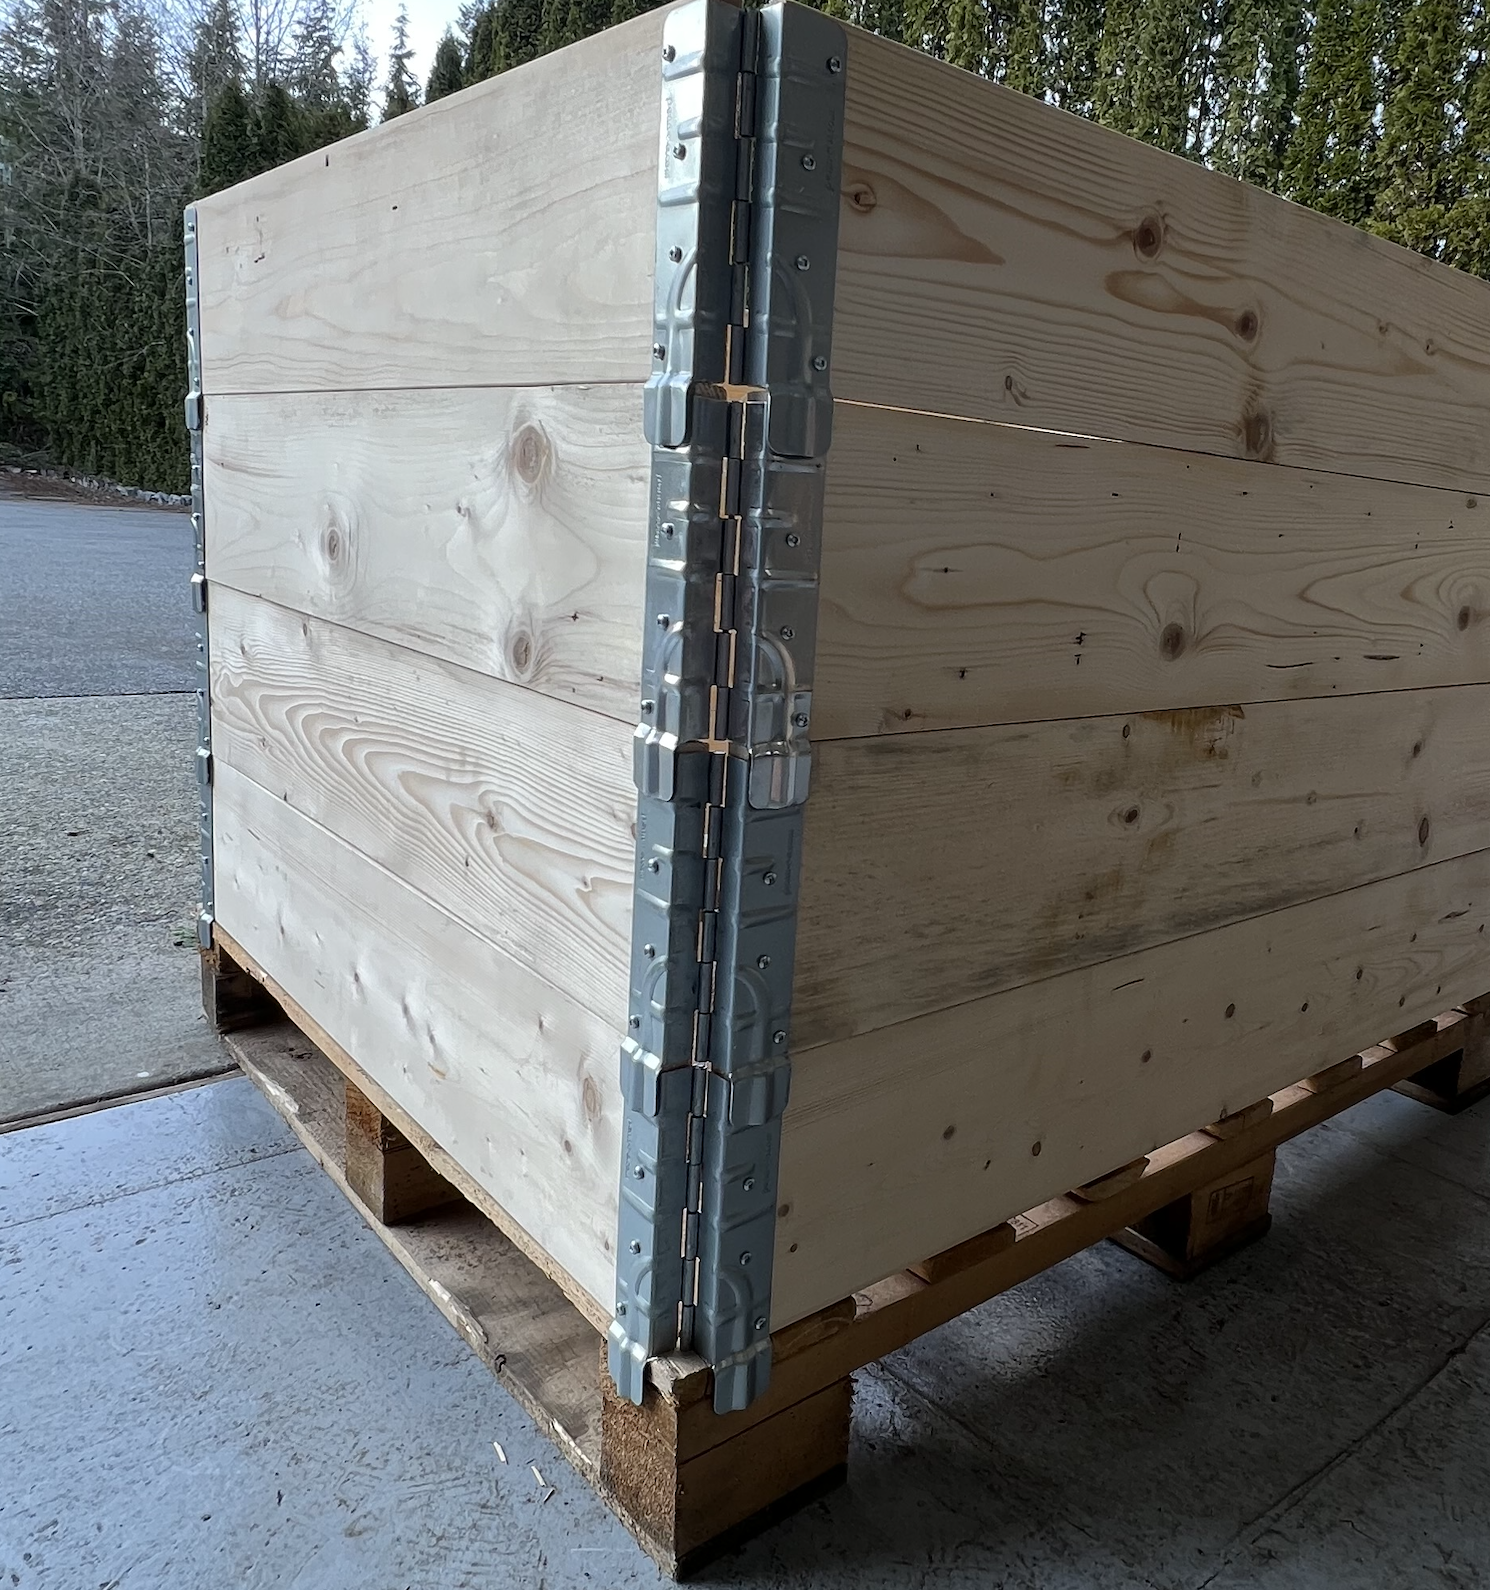 48 x 40 standard size spf wood board pallet collars stacked on top of a pallet using durable metal hinges